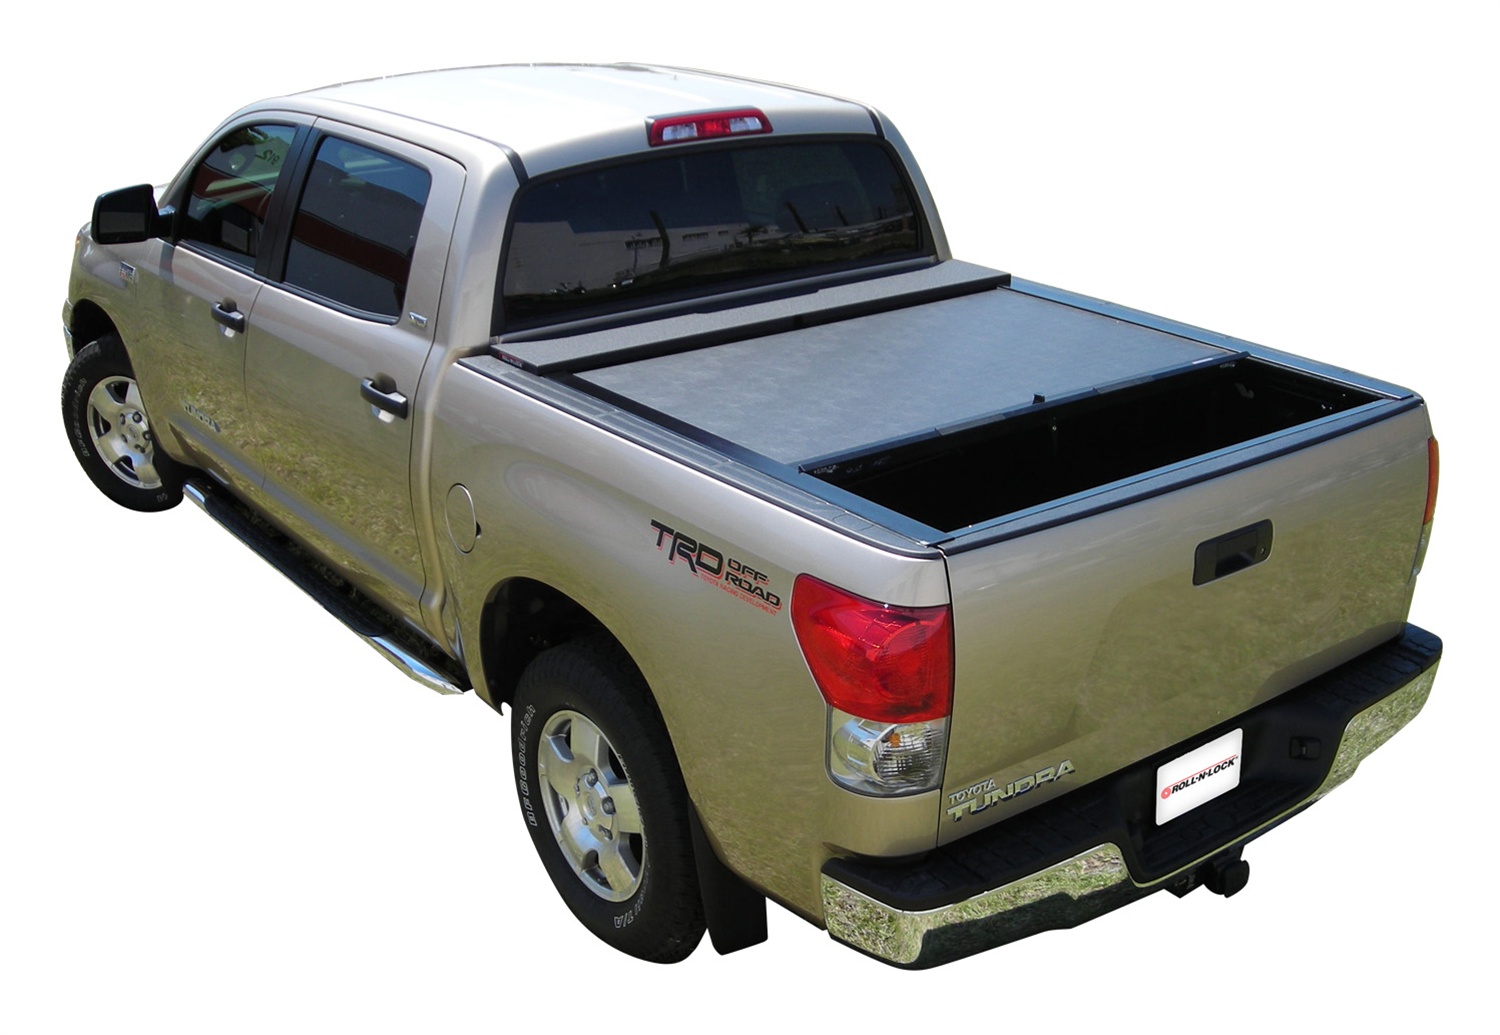 LG572M M-Series Locking Retractable Truck Bed Cover for 2007-2021 Toyota Tundra Regular/Double Cab [8 ft. Bed]